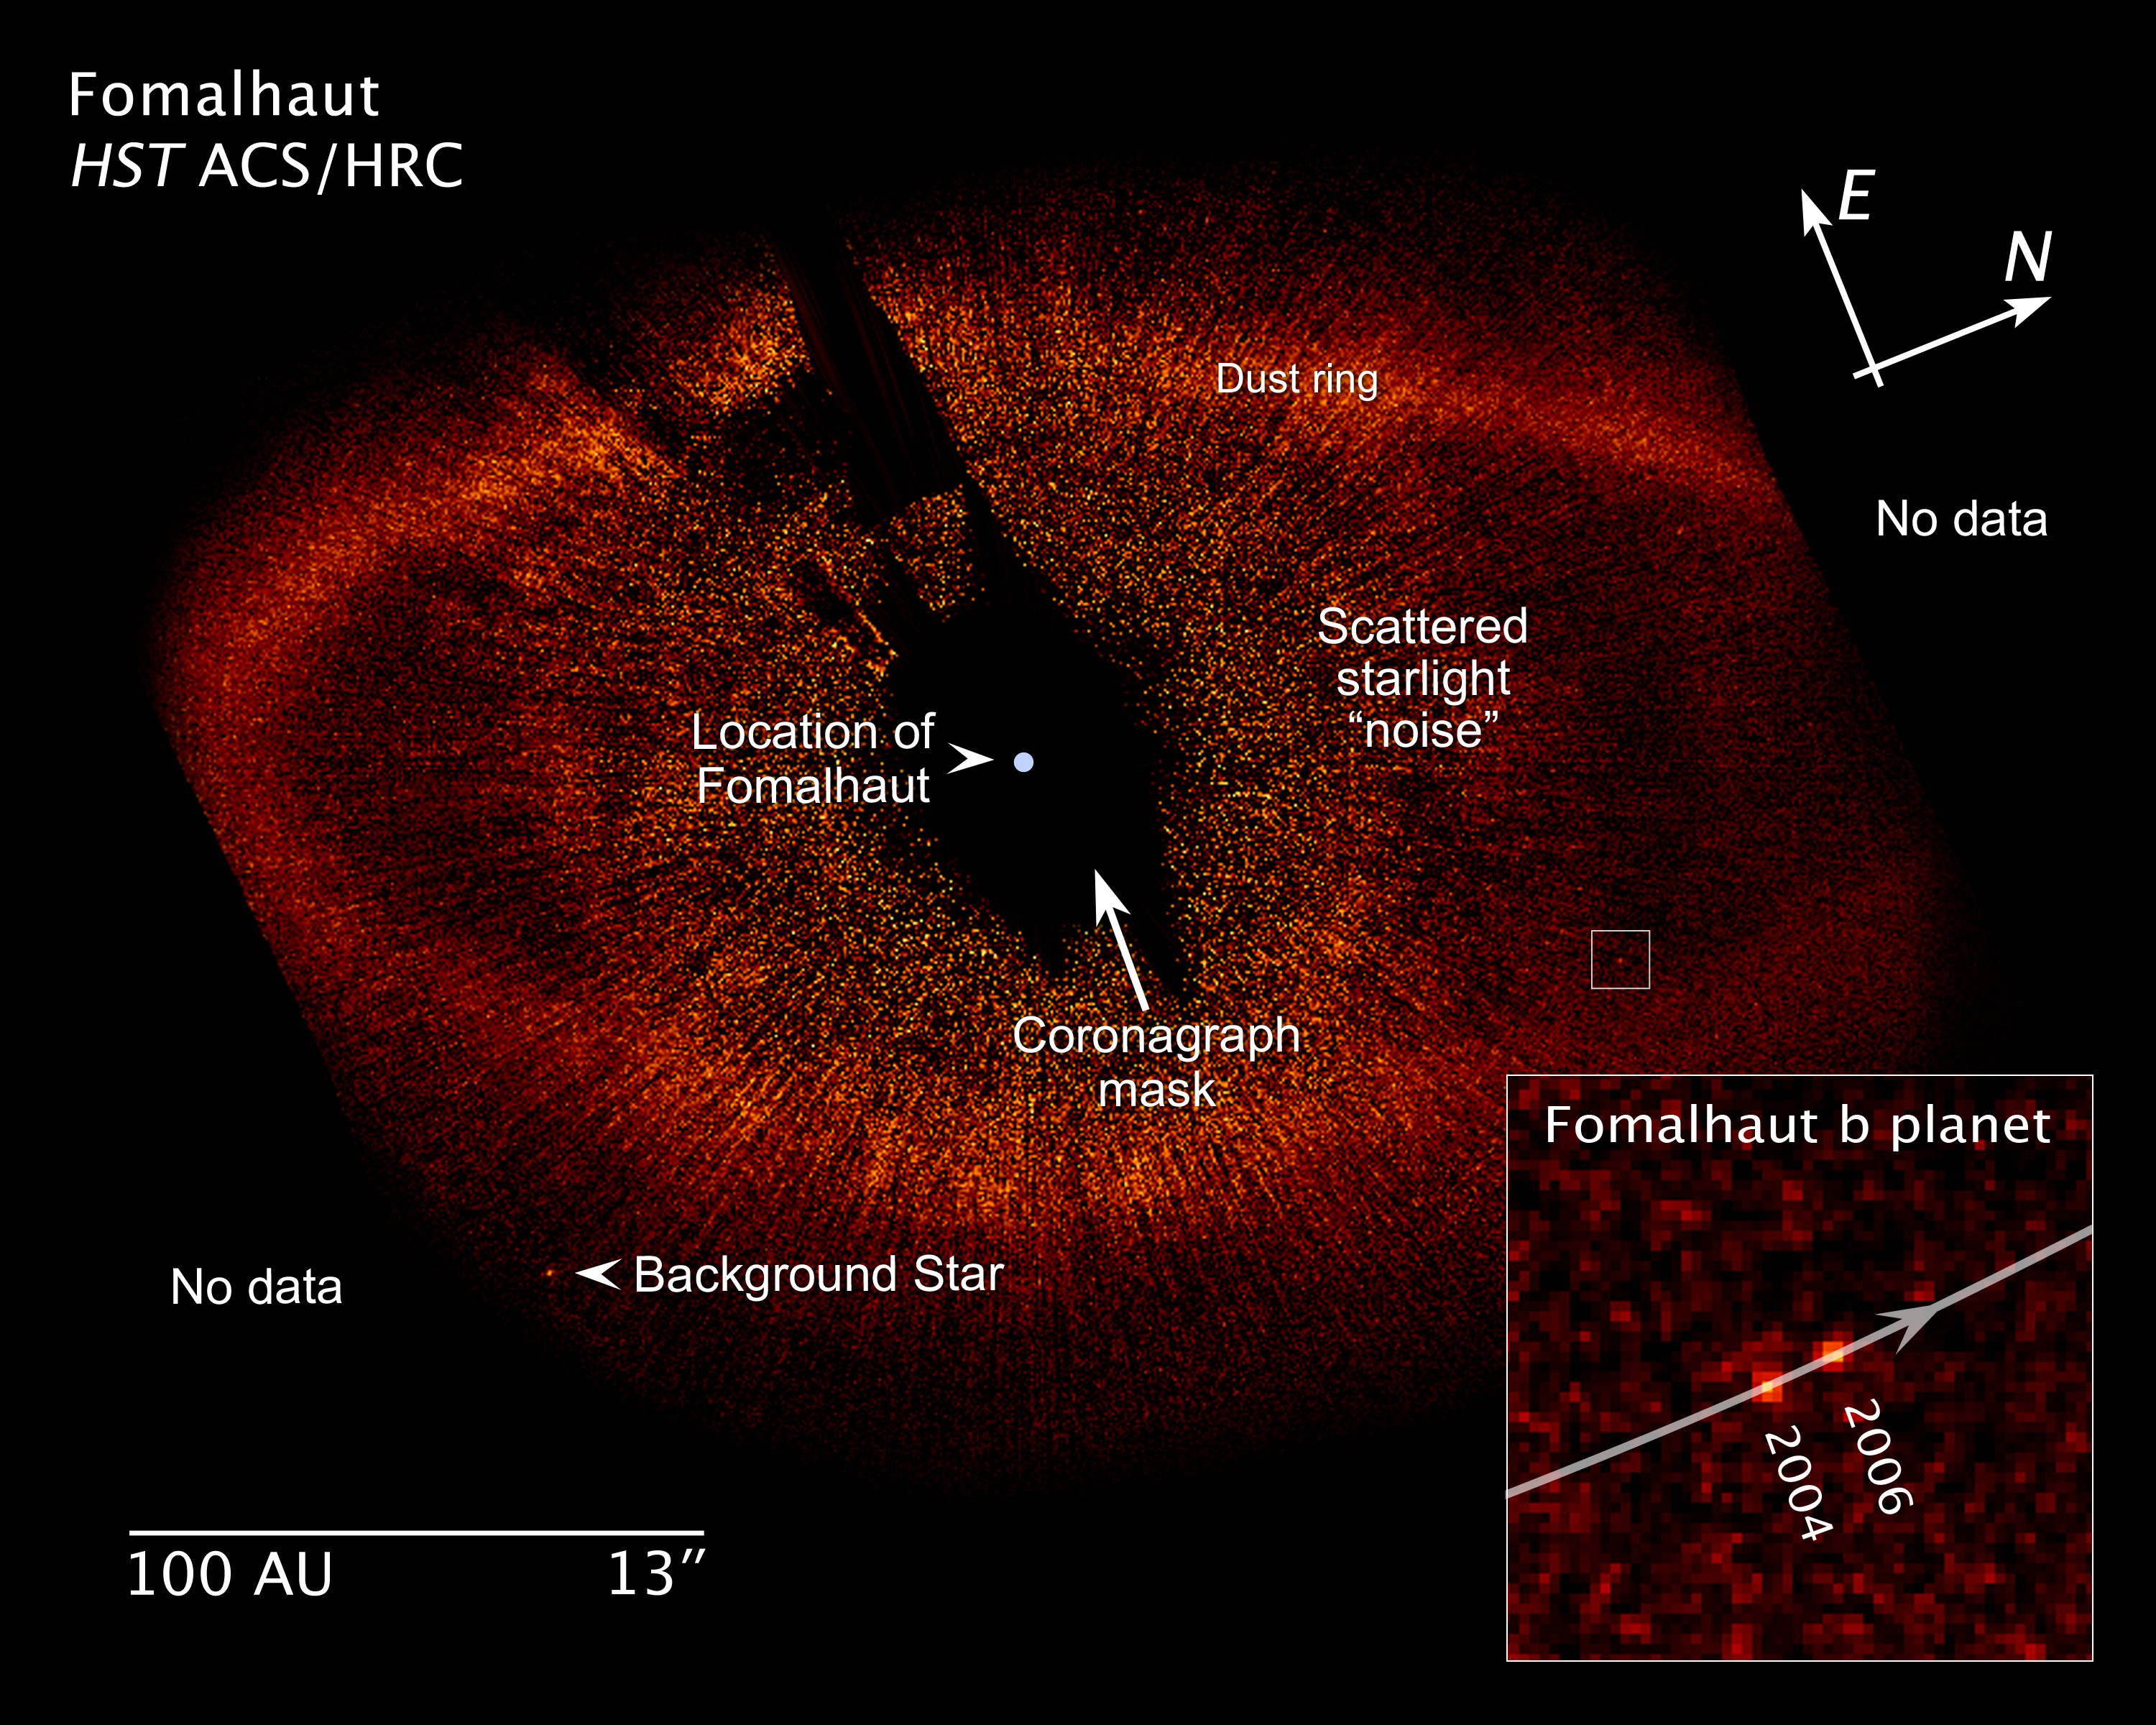 This annotated image shows key features of the Fomalhaut system, including the newly discovered planet Fomalhaut b, and the dust ring. Also included are a distance scale and an insert, showing how the planet has moved around its parent star over the course of 21 months. The Fomalhaut system is located approximately 25 light-years from the Earth. Credit: NASA, ESA, and Z. Levay (STScI)